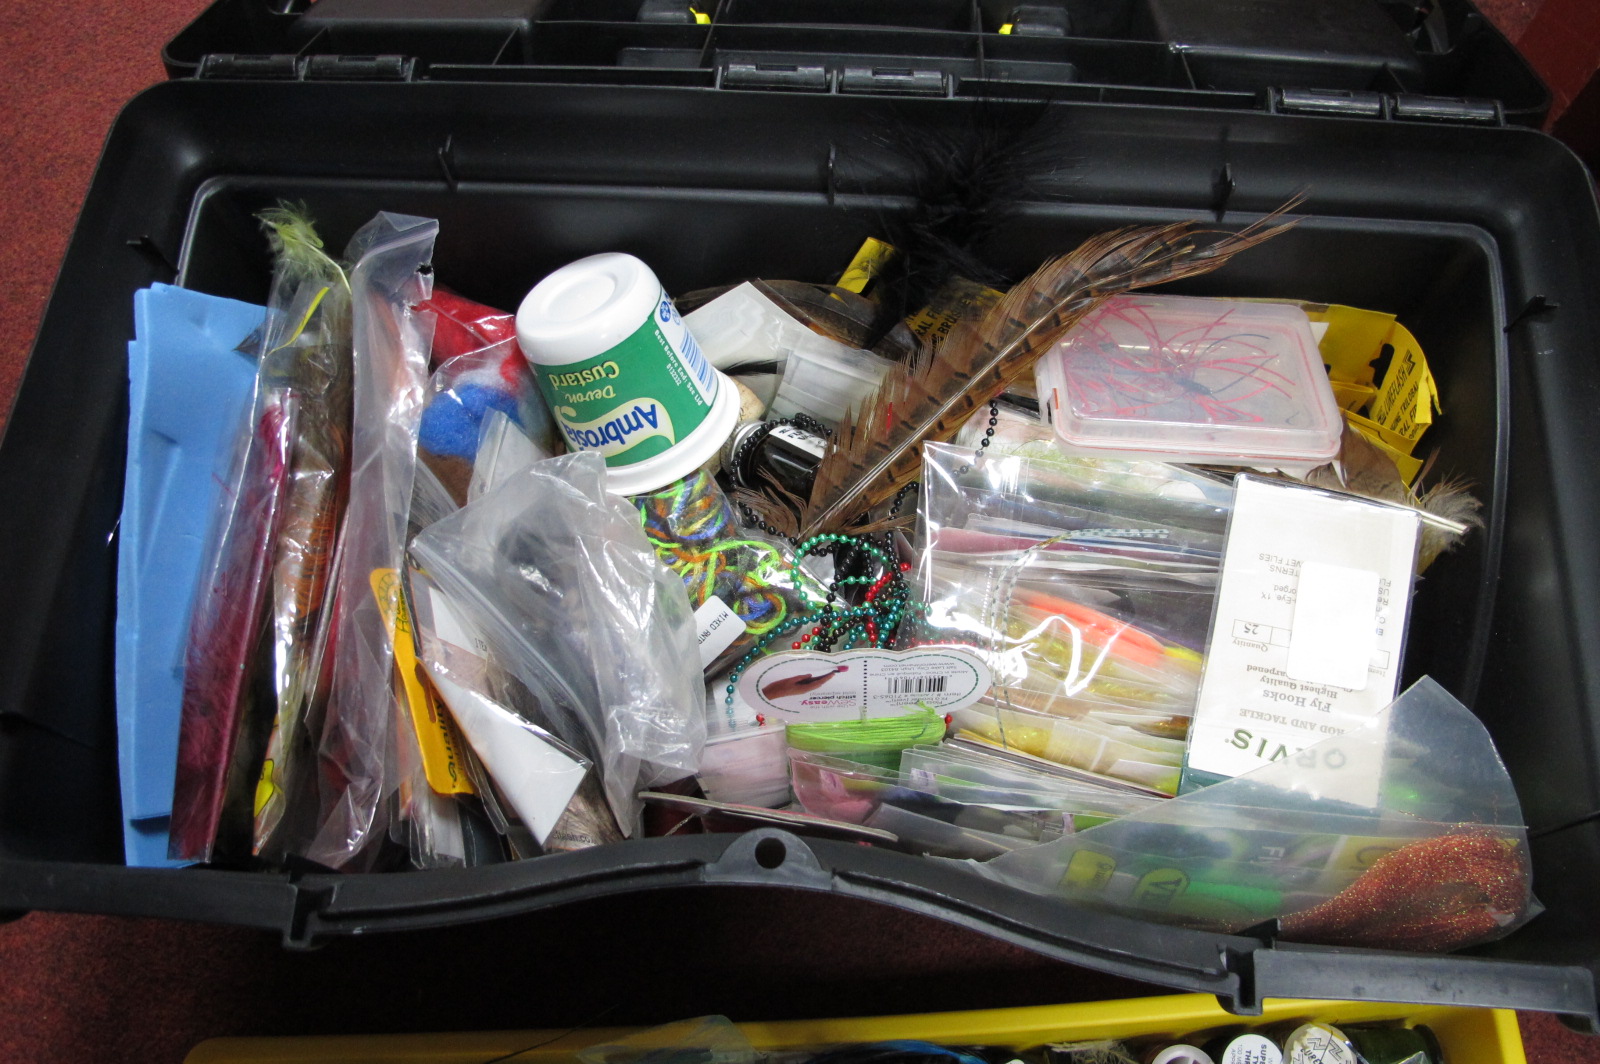 Fly Fishing Equipment, including lures, clamp, tying thread, clothing, hooks, feathers. - Image 3 of 11